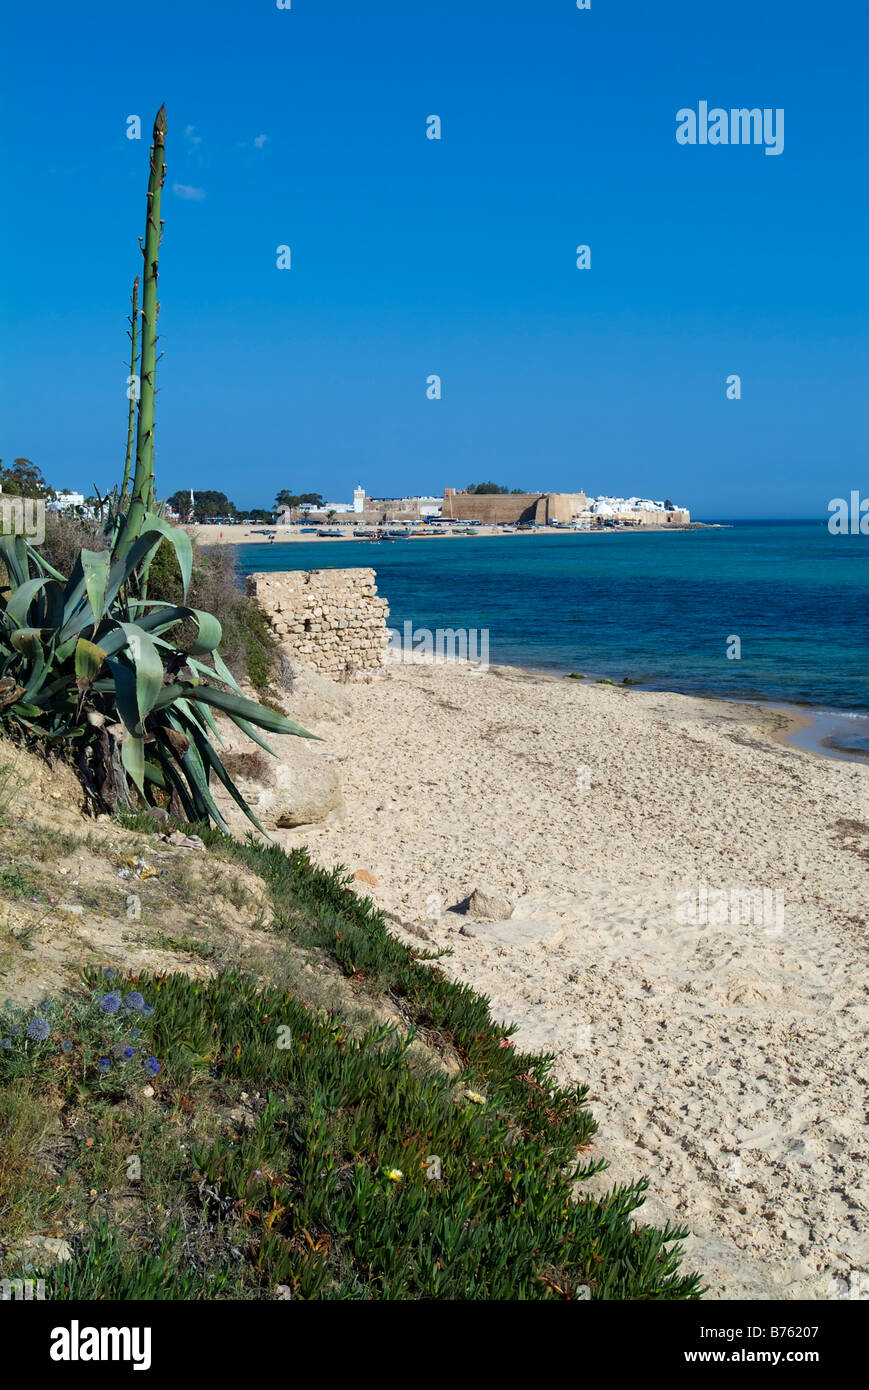 Beach and shoreline with the Medina in the background, Hammamet, Tunisia, North Africa Stock Photo